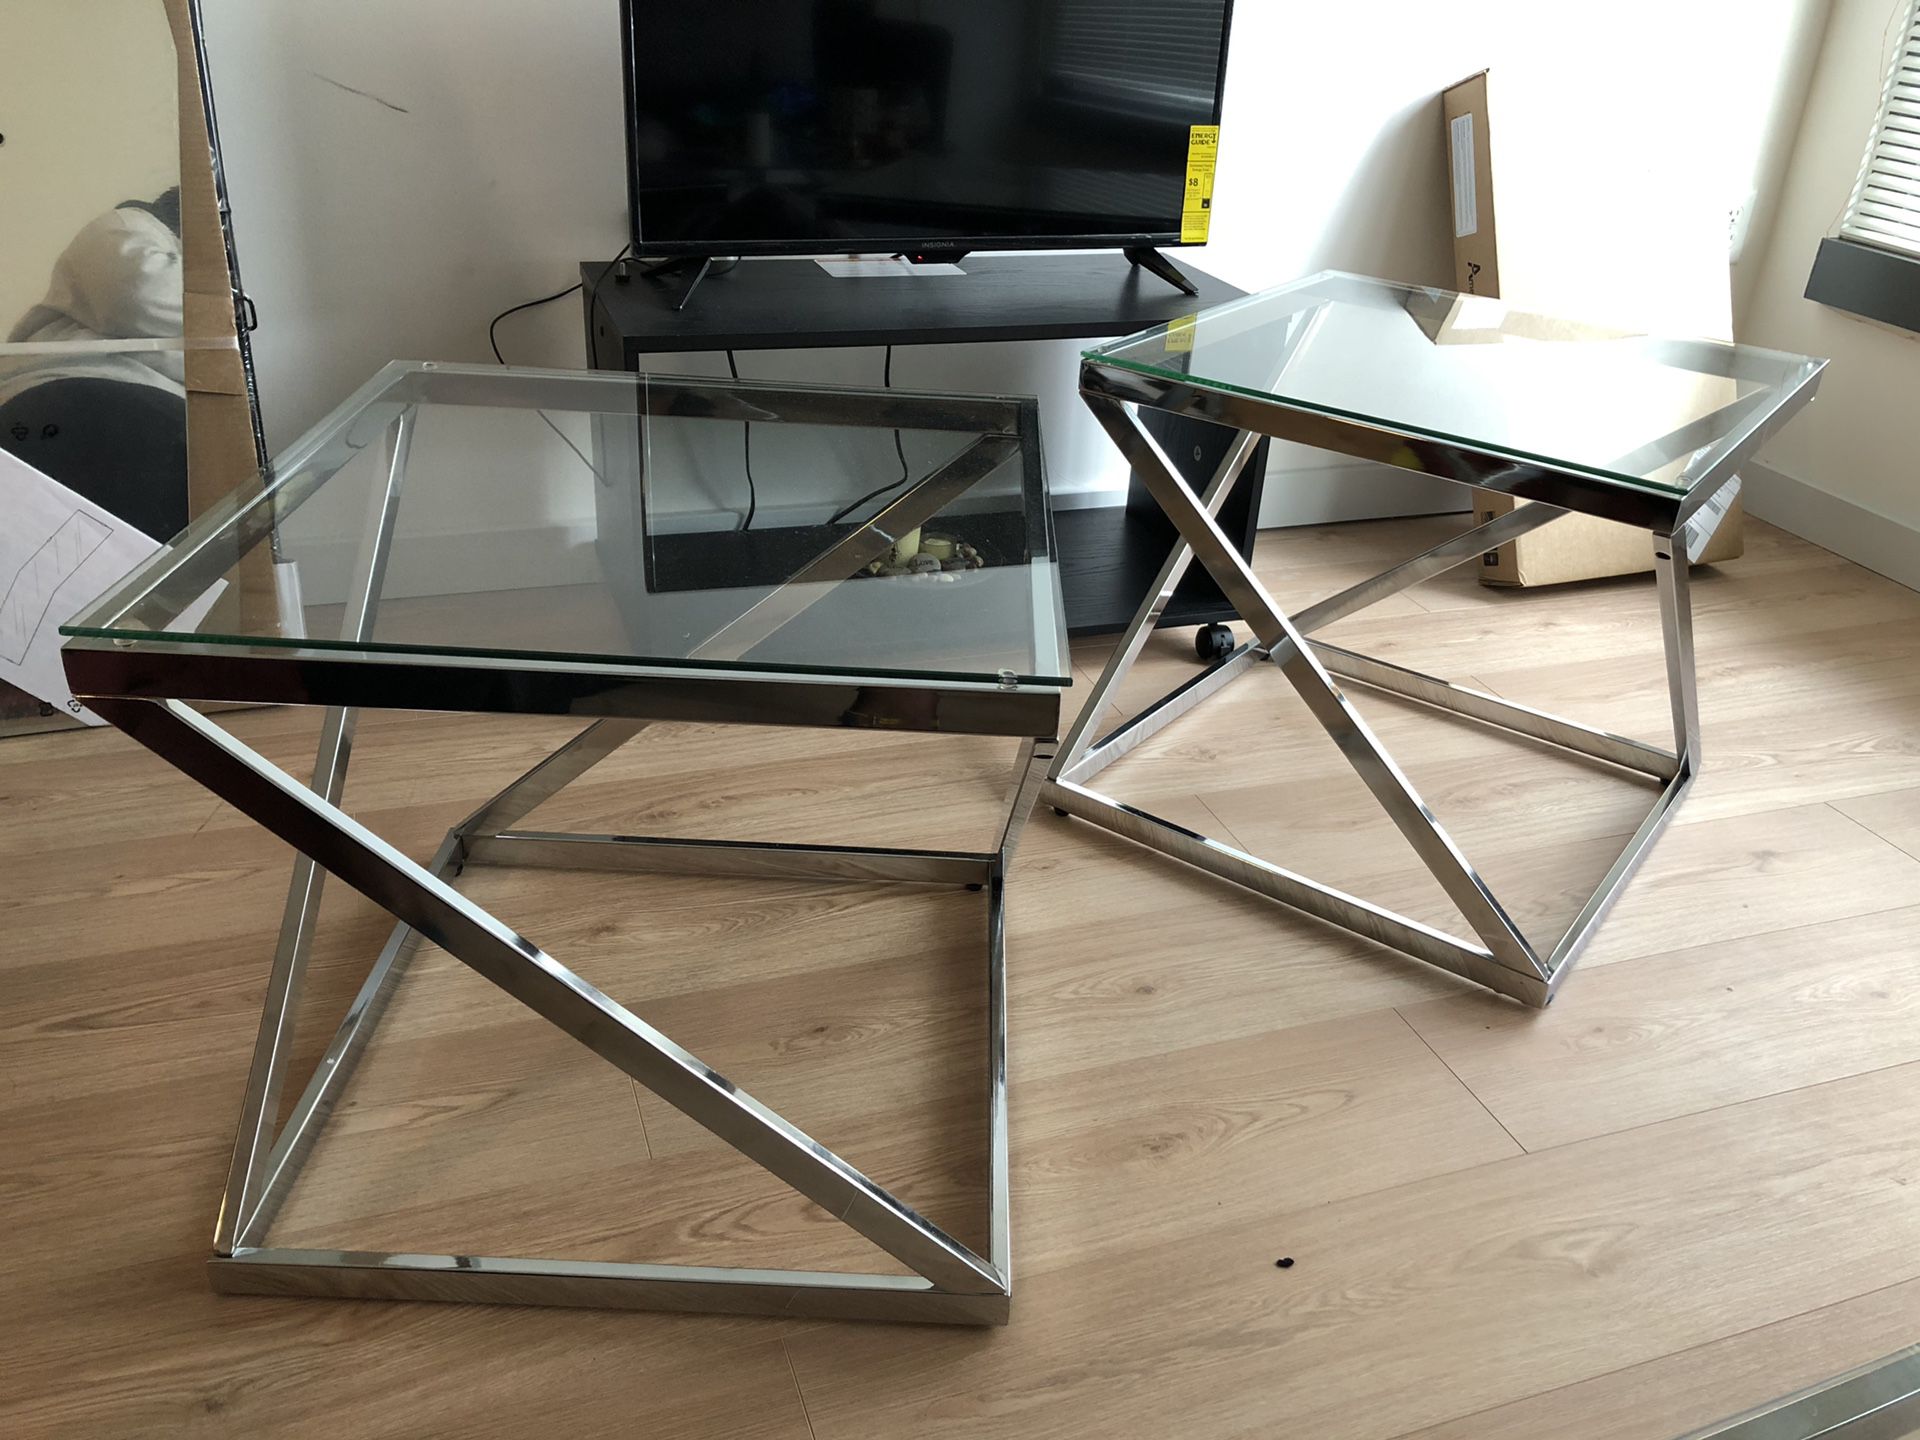 2 glass/mirror end tables